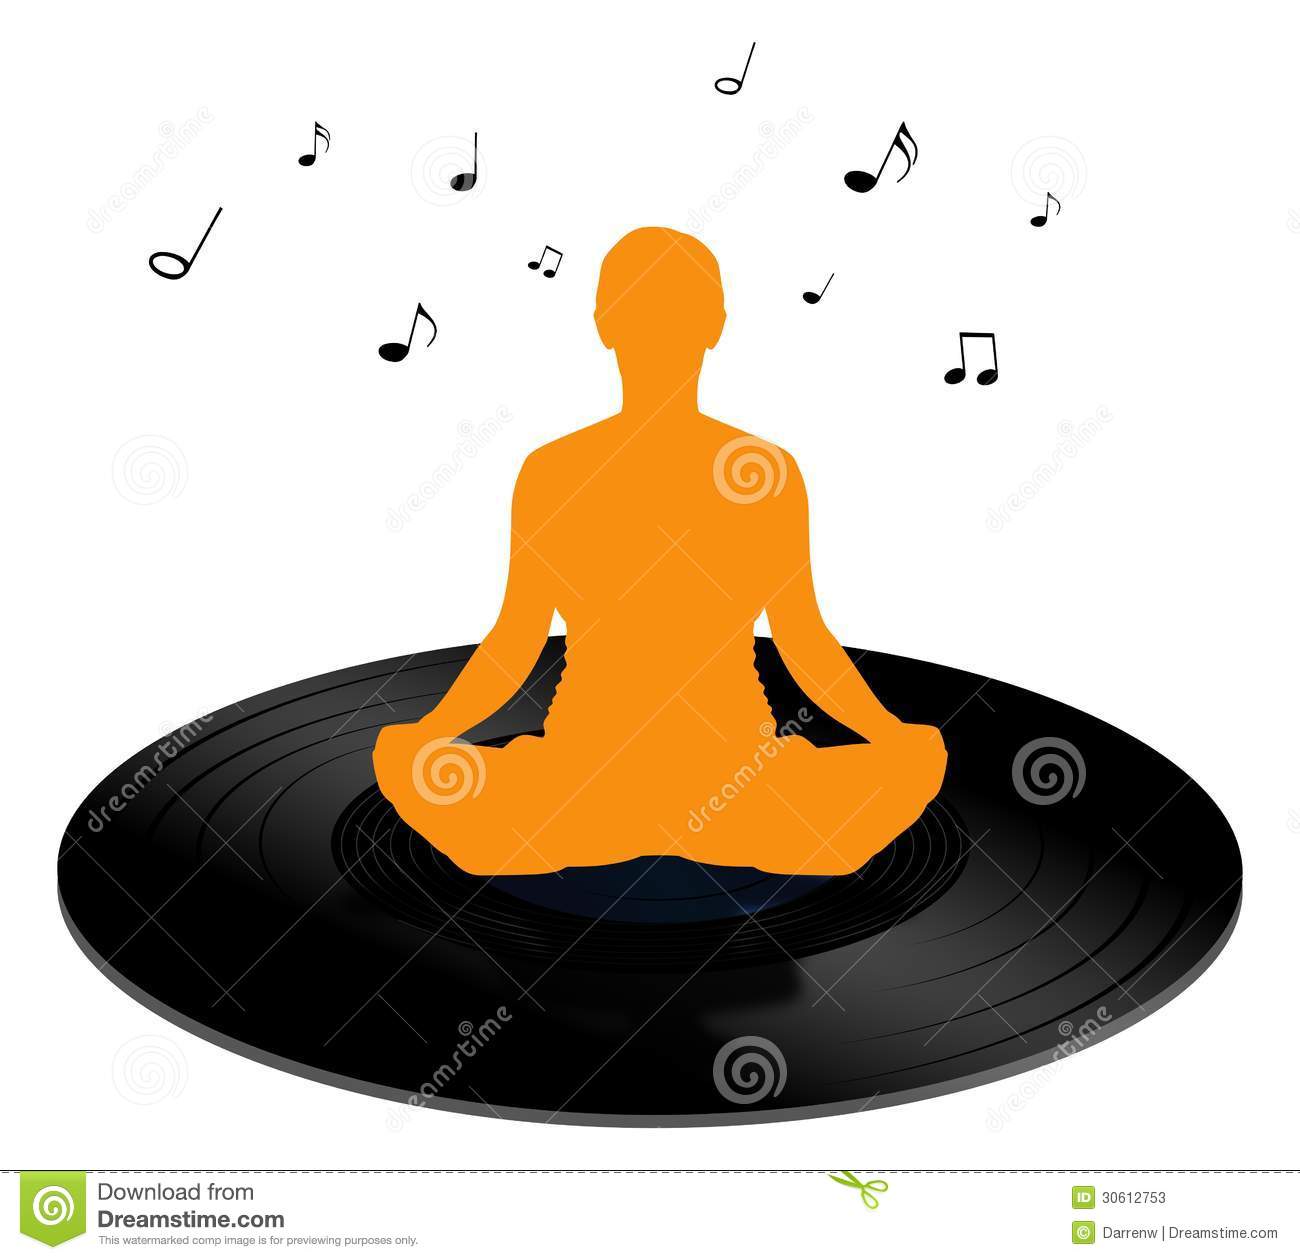 Of A Person Sitting On A Vinyl Record And Listening To Calming Music